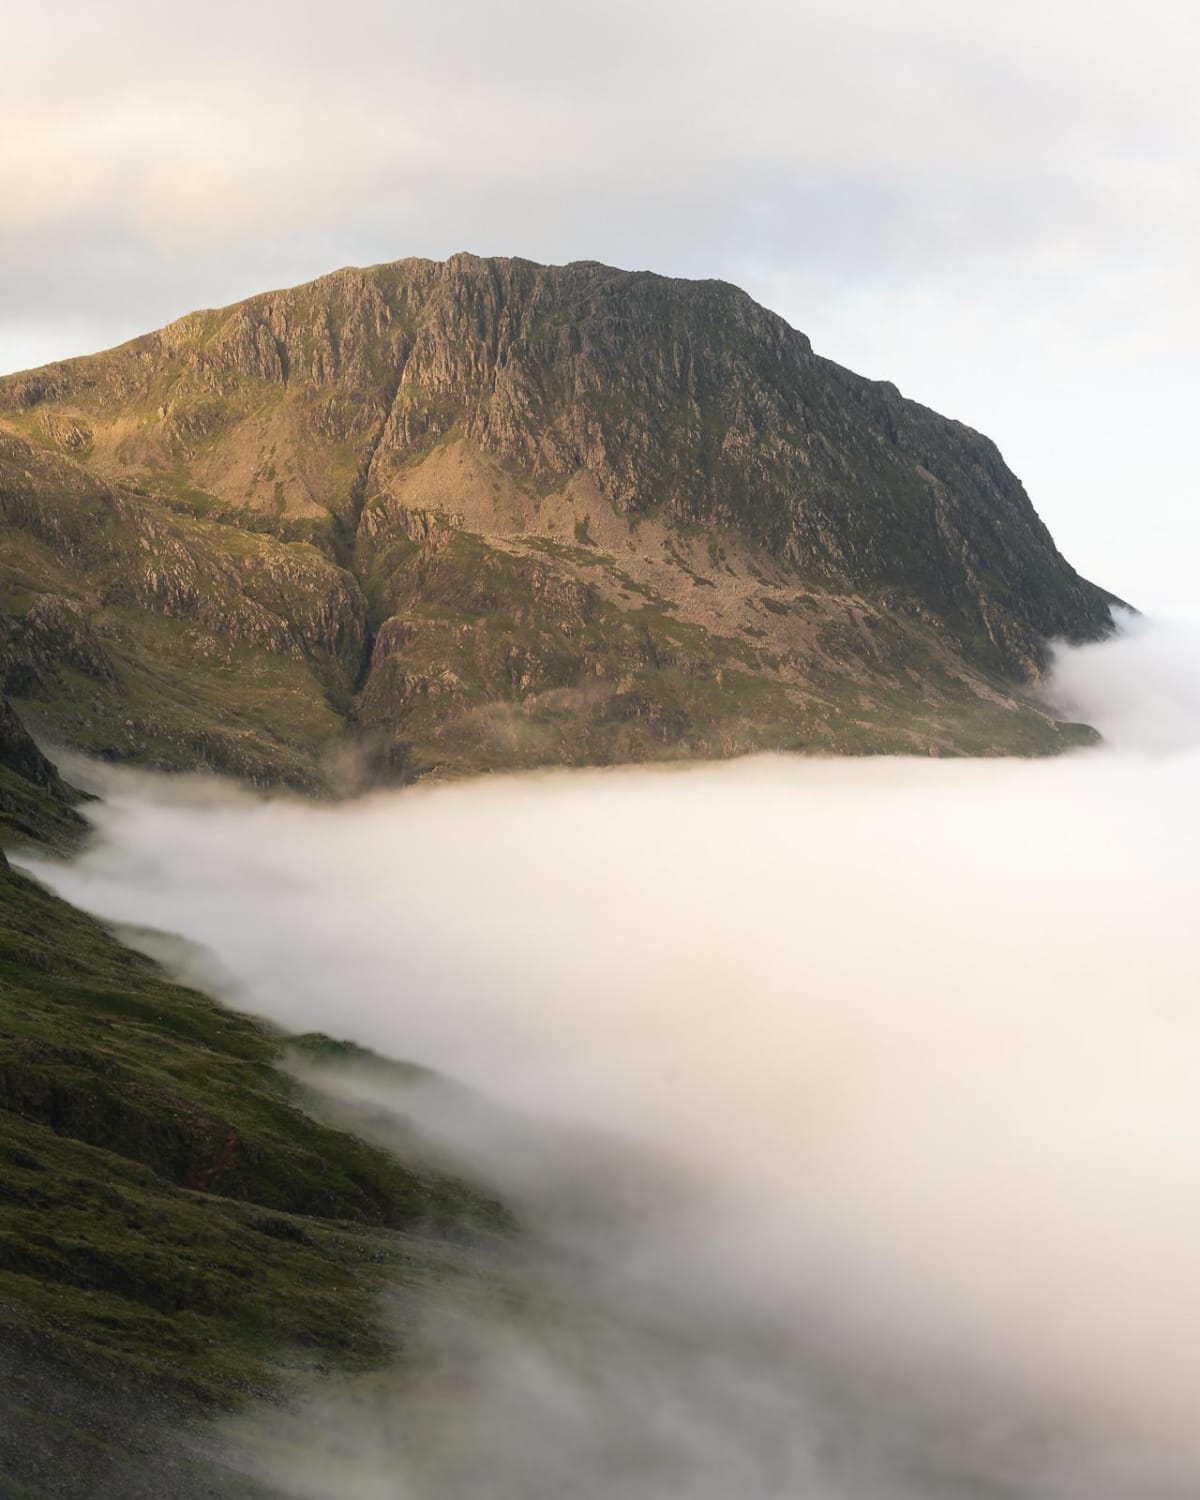 Cloud inversion in the Lake District, England.